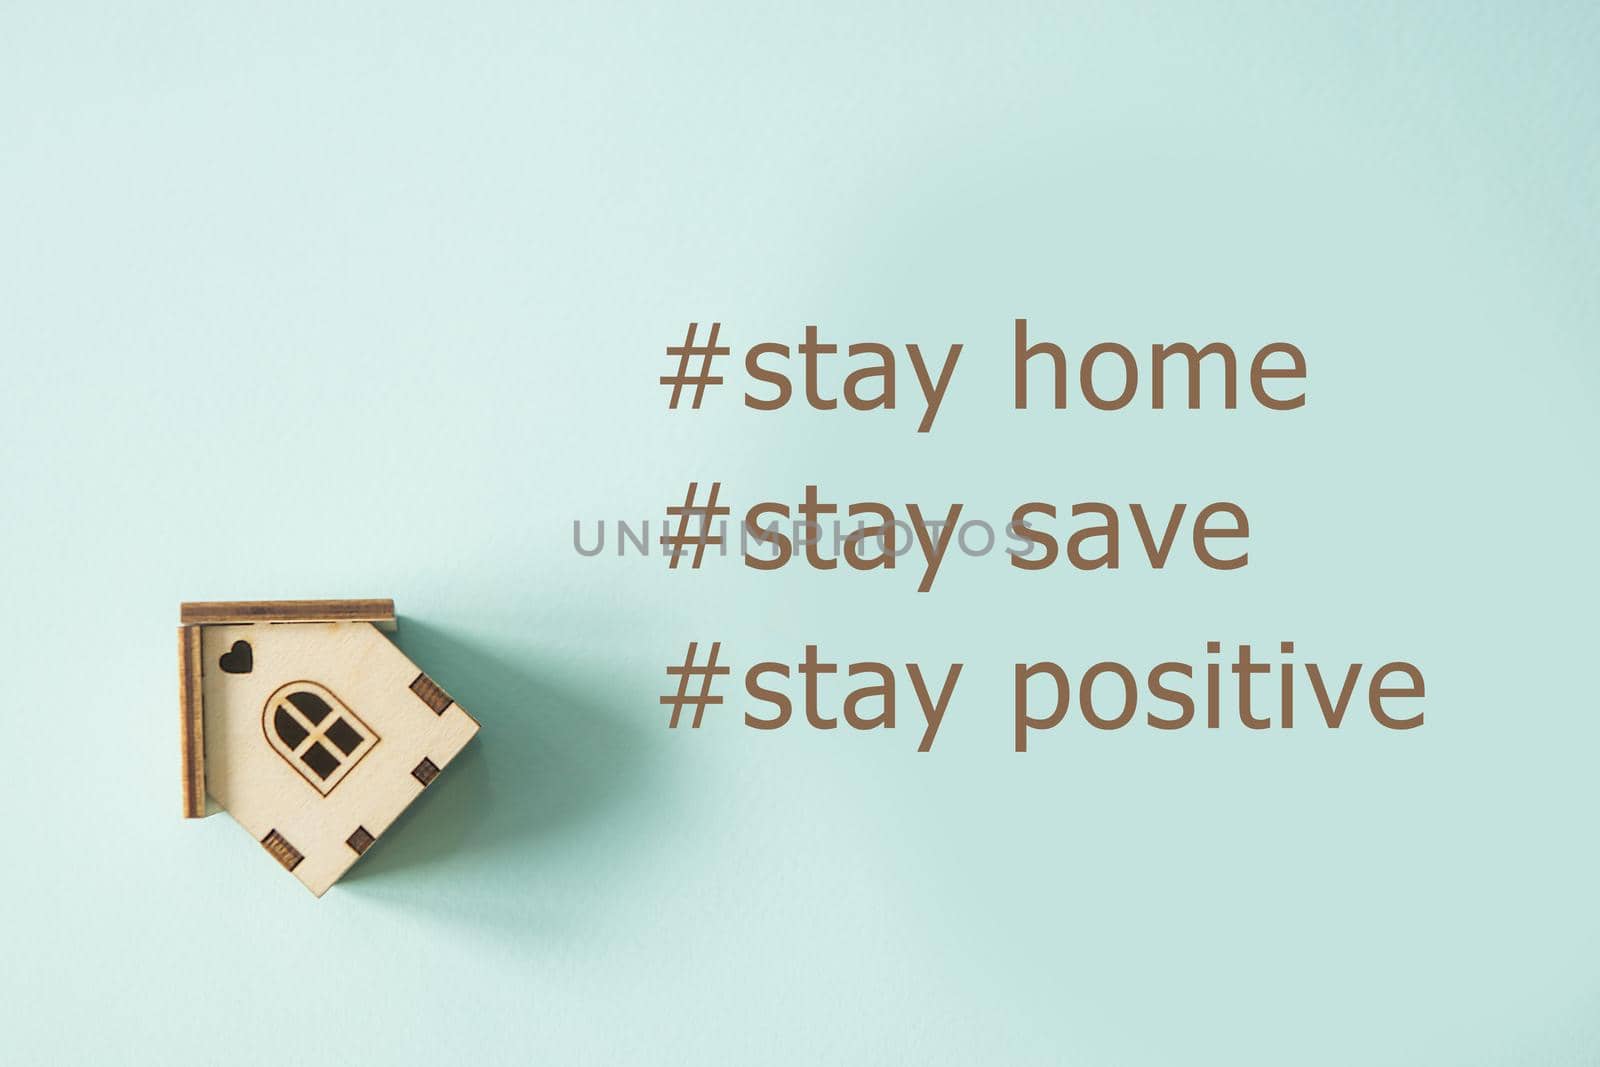 Text Stay home. Concept of self-quarantine at home as a preventive measure against an outbreak of the virus. Flat lay with an inspired quote, staying at home during the pandemic. Wooden house on a mint background.